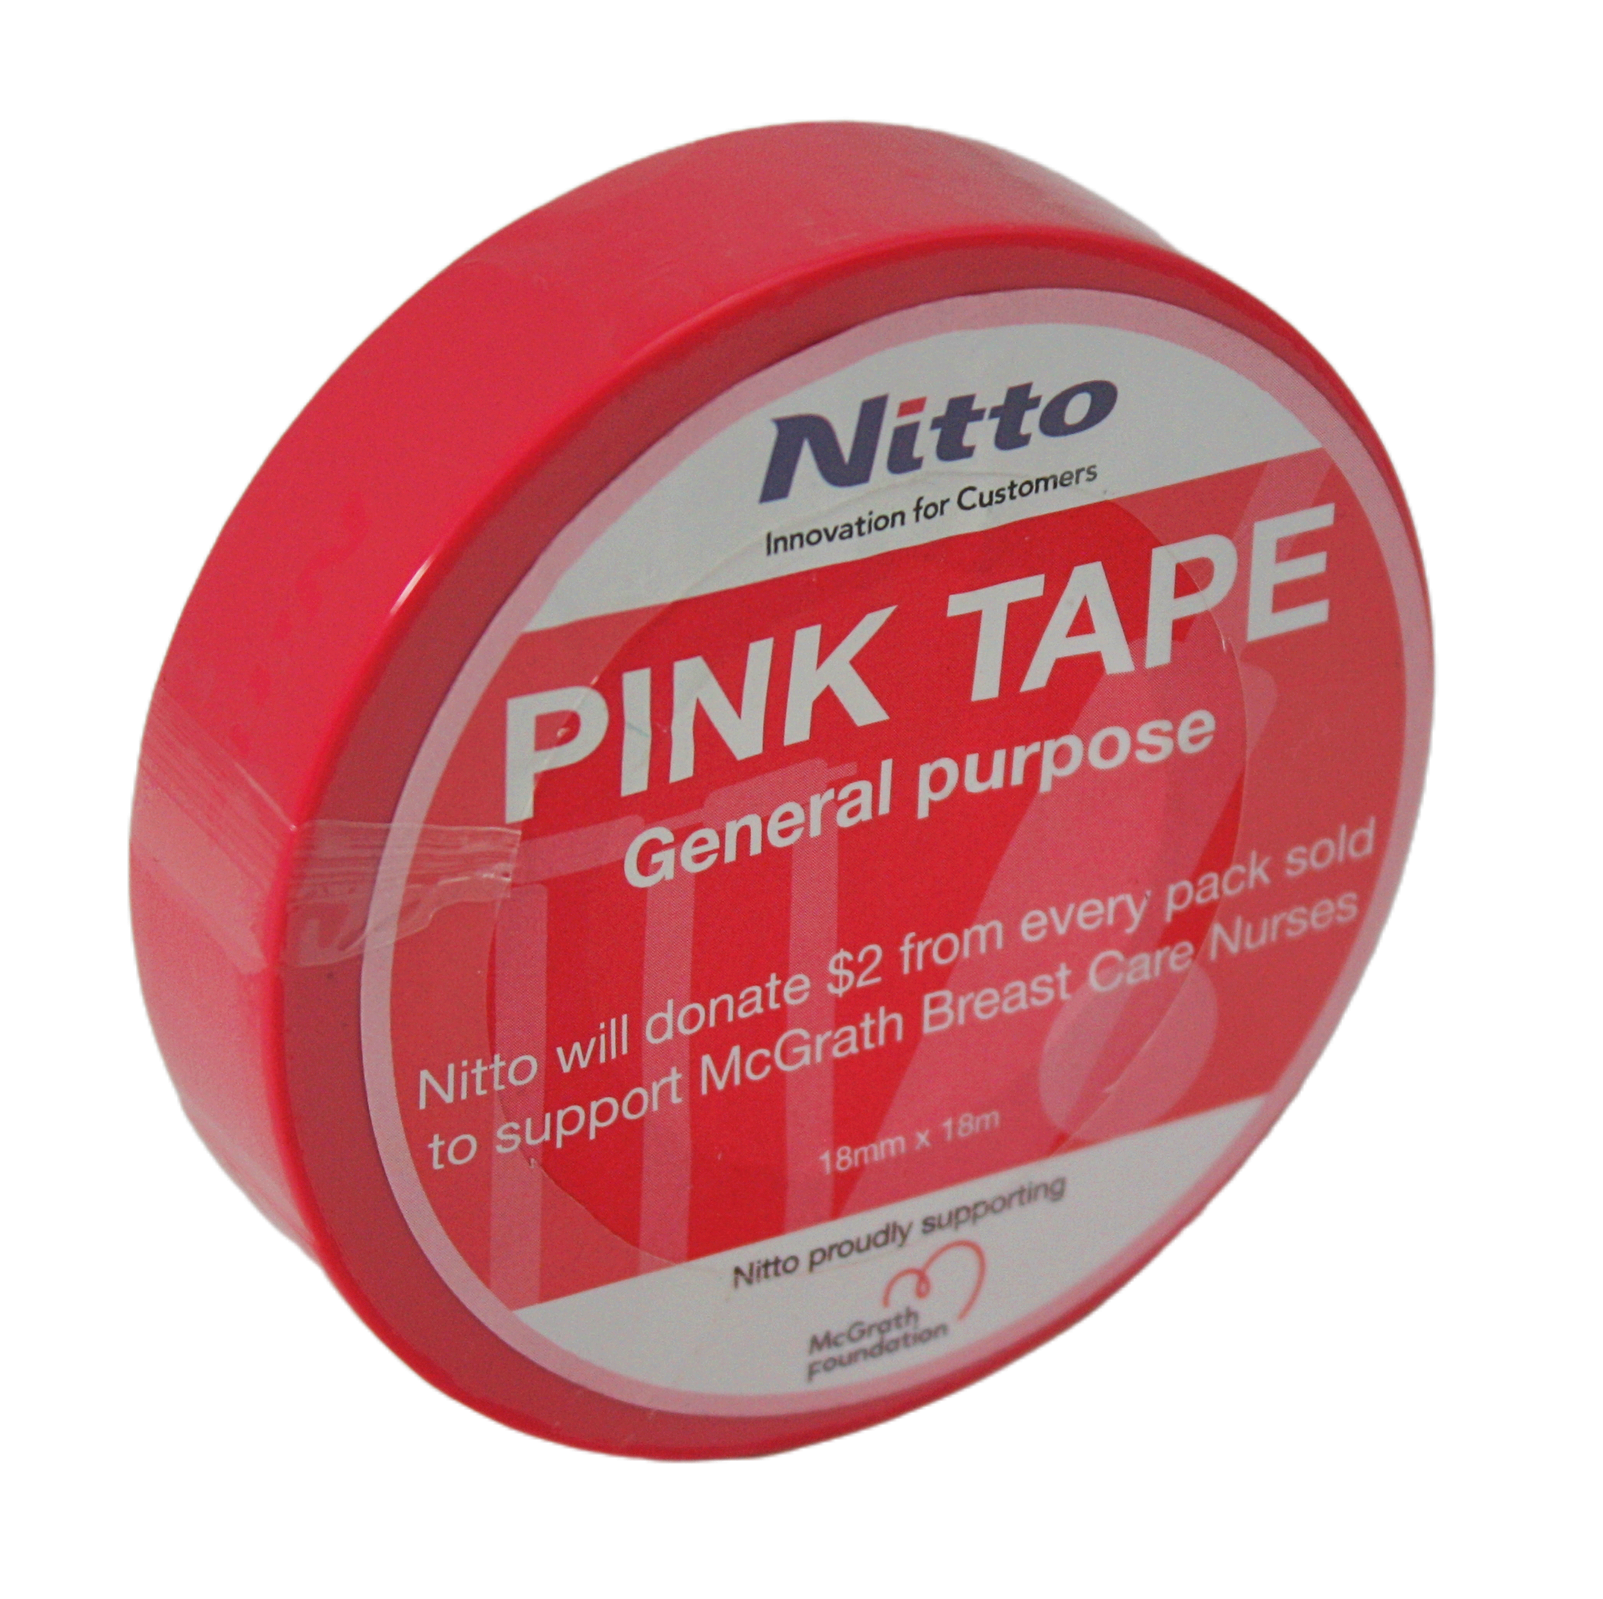 Nitto electrical tape, pink